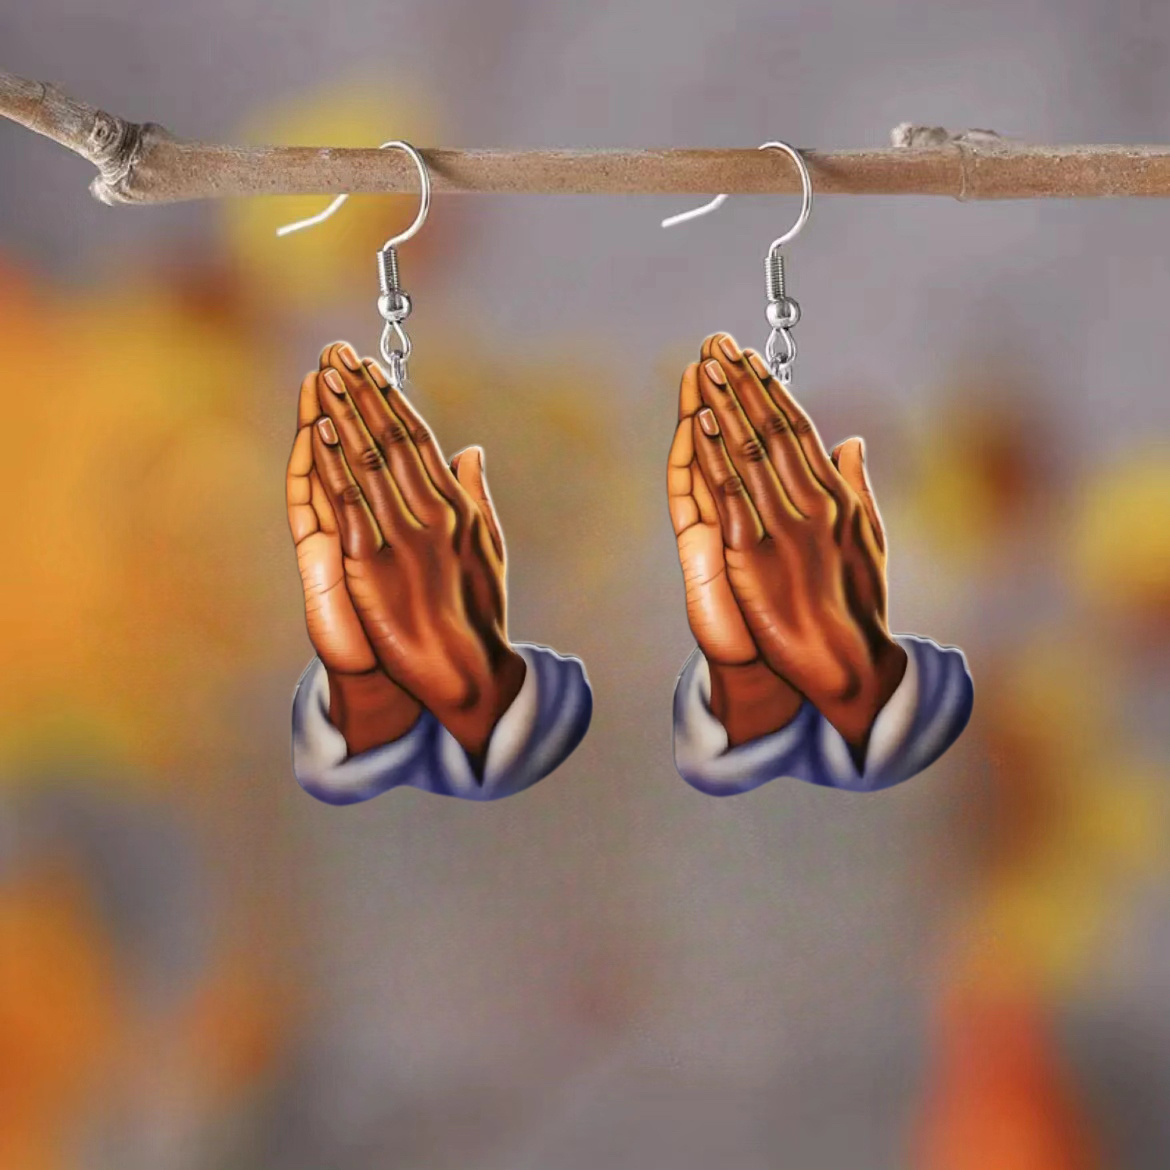 

1 Pair Acrylic Praying Hands Earrings - Fashionable Dangle Drop Hook Earrings For Women And Girls, Unique Spiritual Jewelry Gift For Wife And Daughter